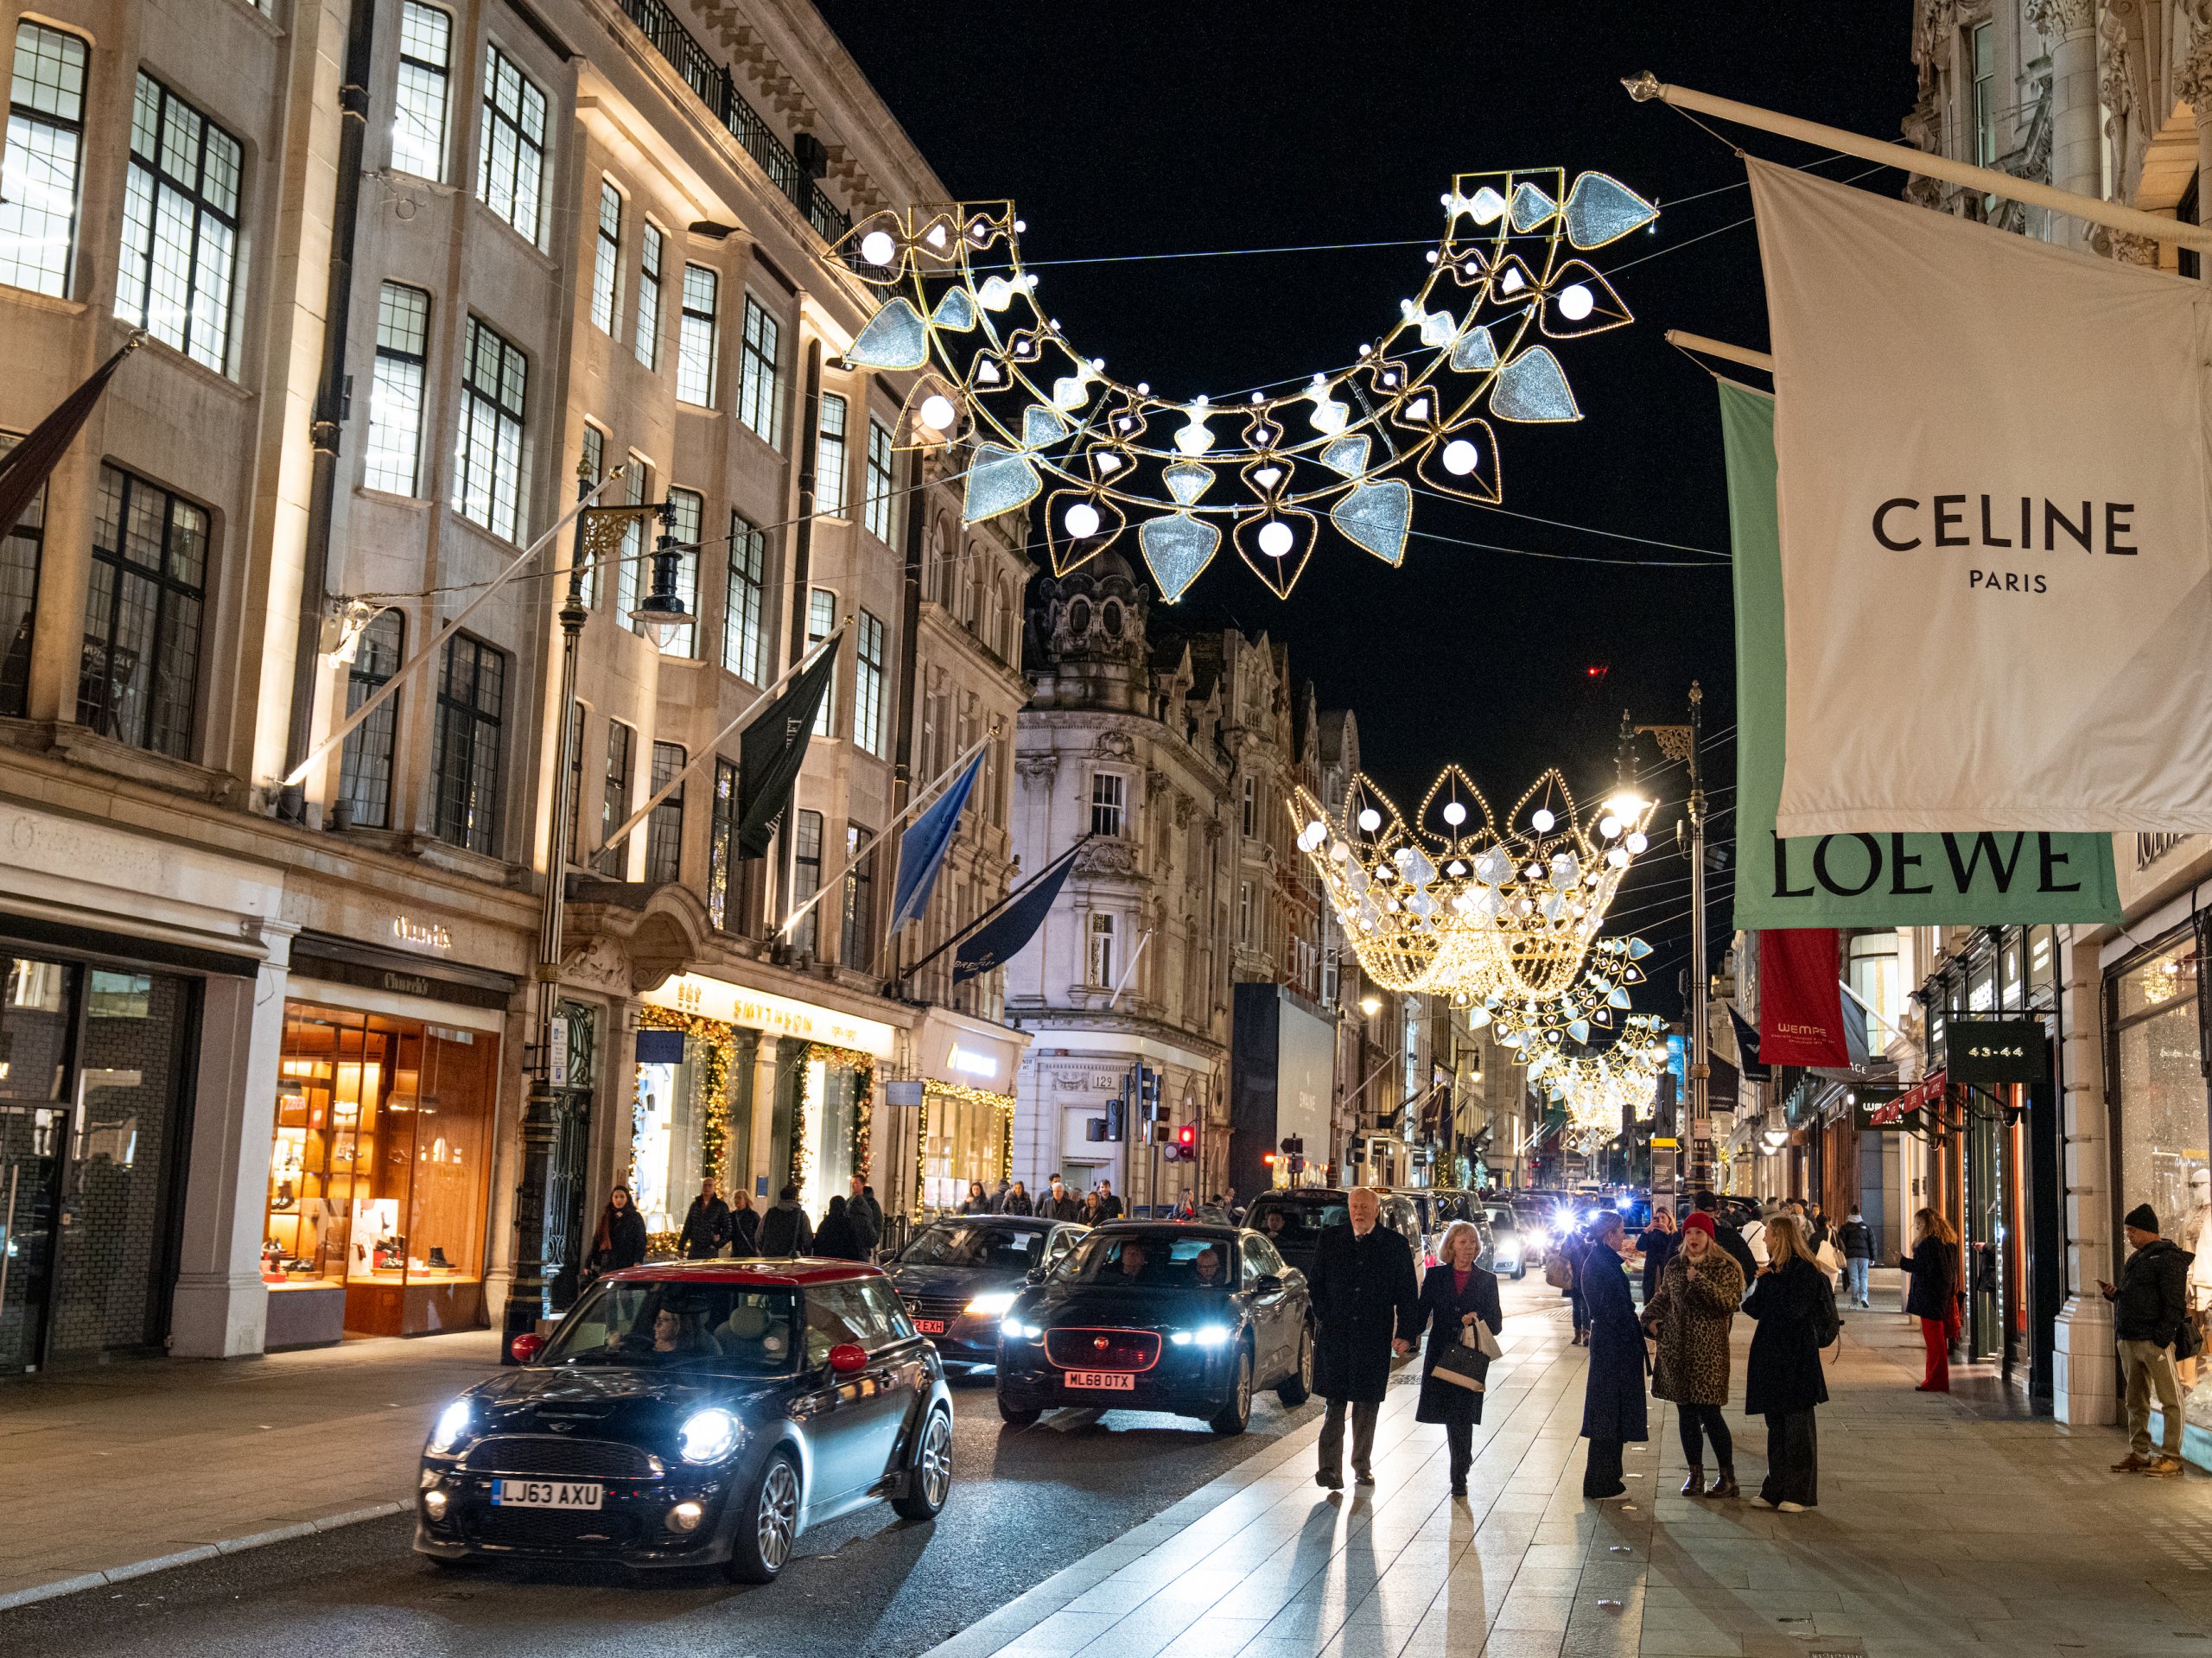 The Bond Street Christmas Lights - Sparkles and Shoes